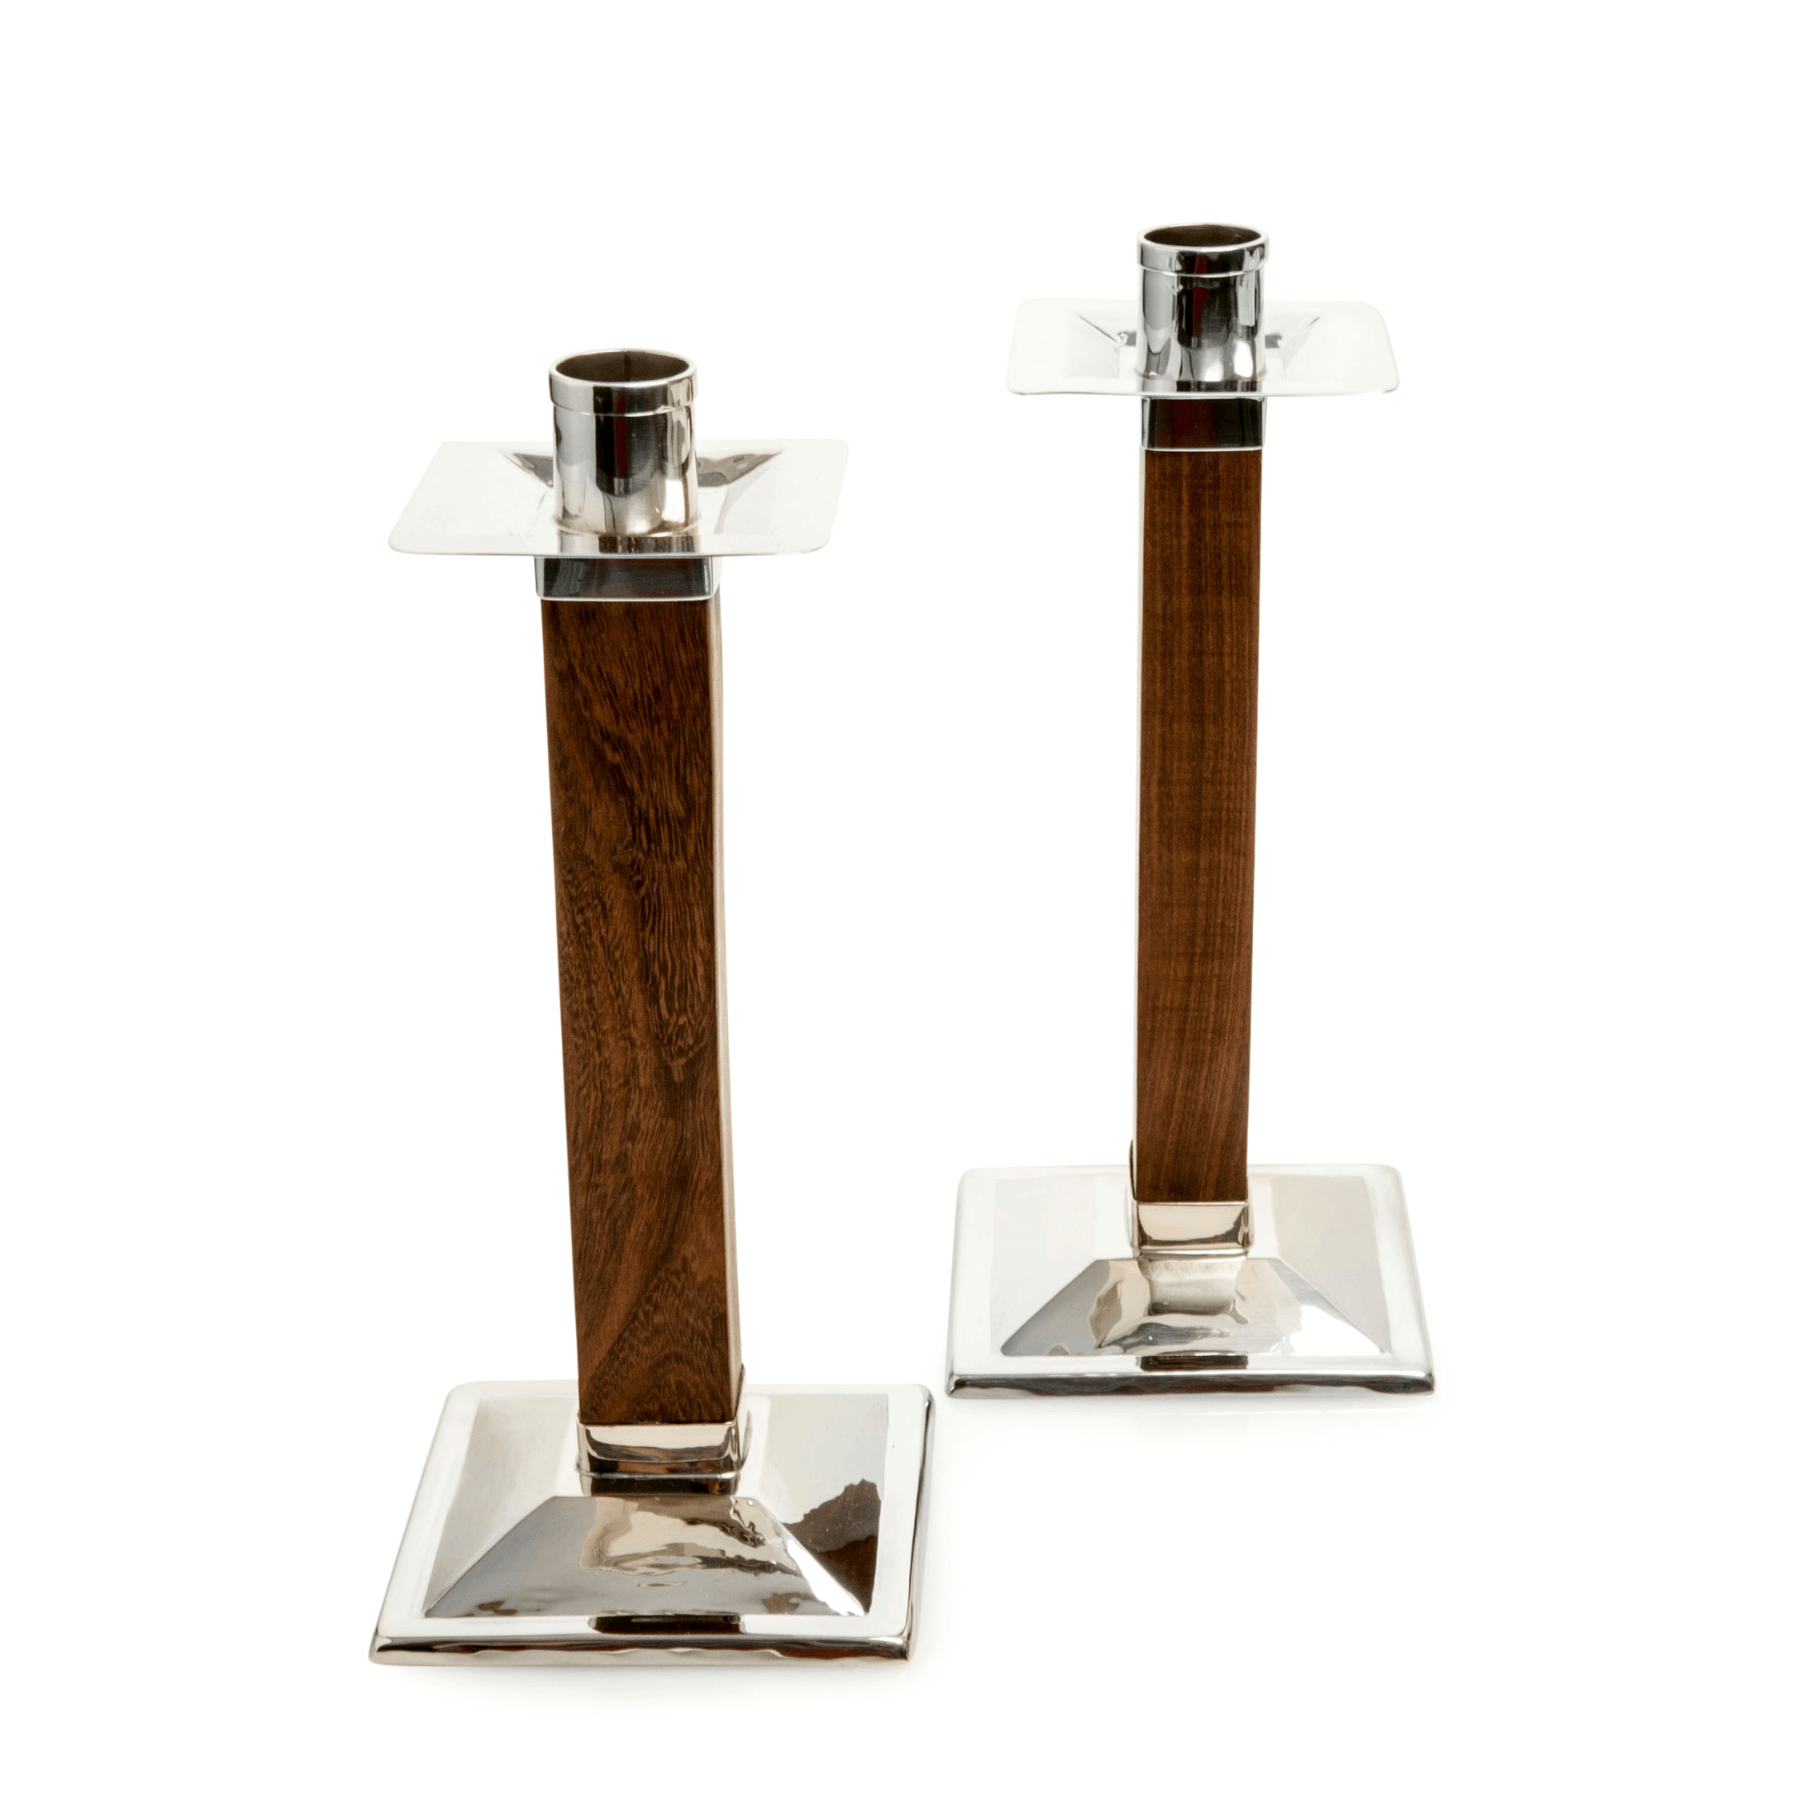 Gaucholife Home Chandeliers Candlesticks with Lignum Vitae